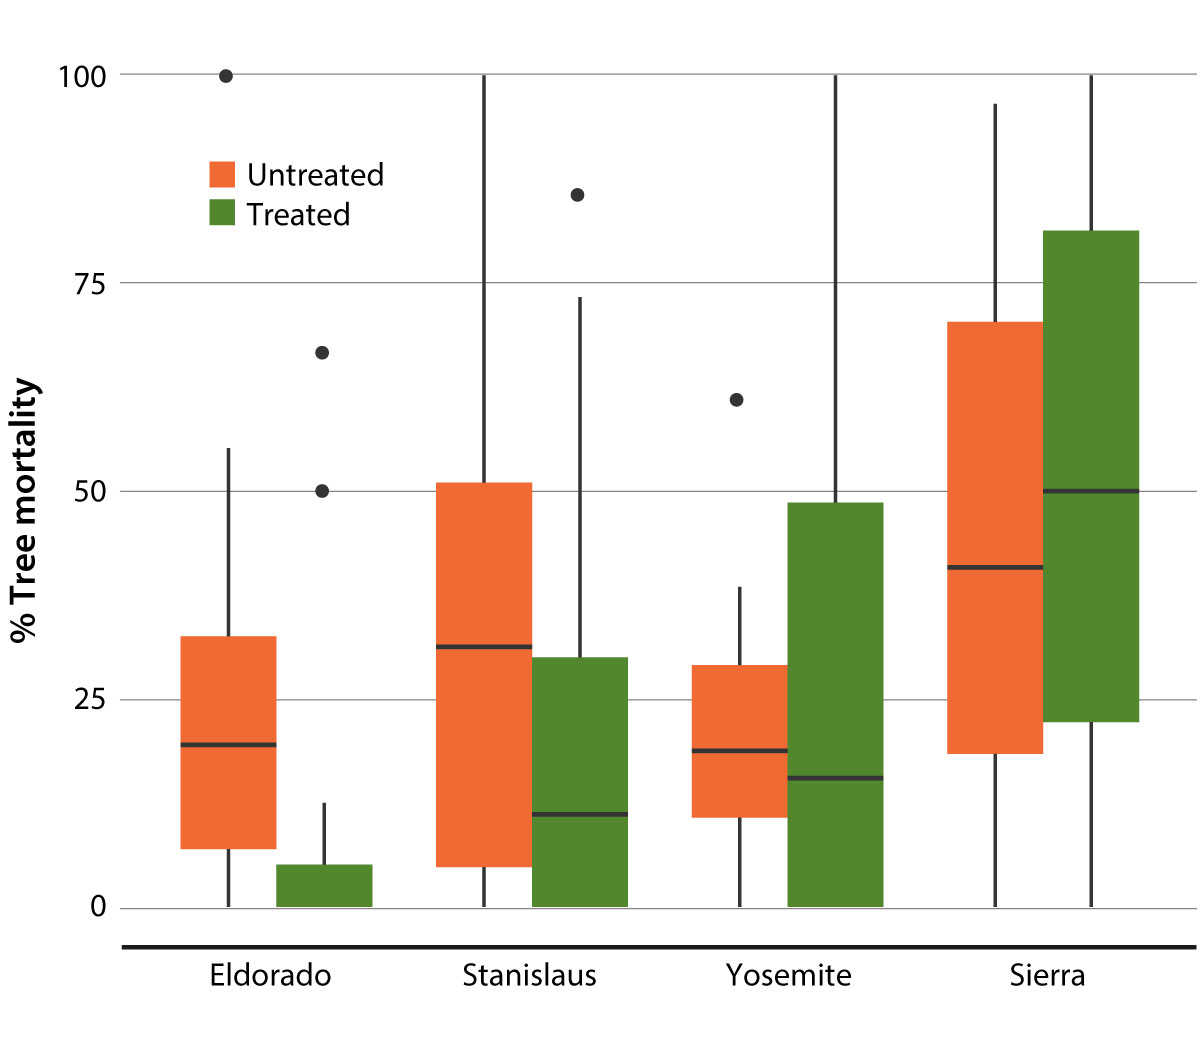 The effectiveness of thinning treatments decreased from the central to southern Sierra Nevada (Restaino et al., in press).